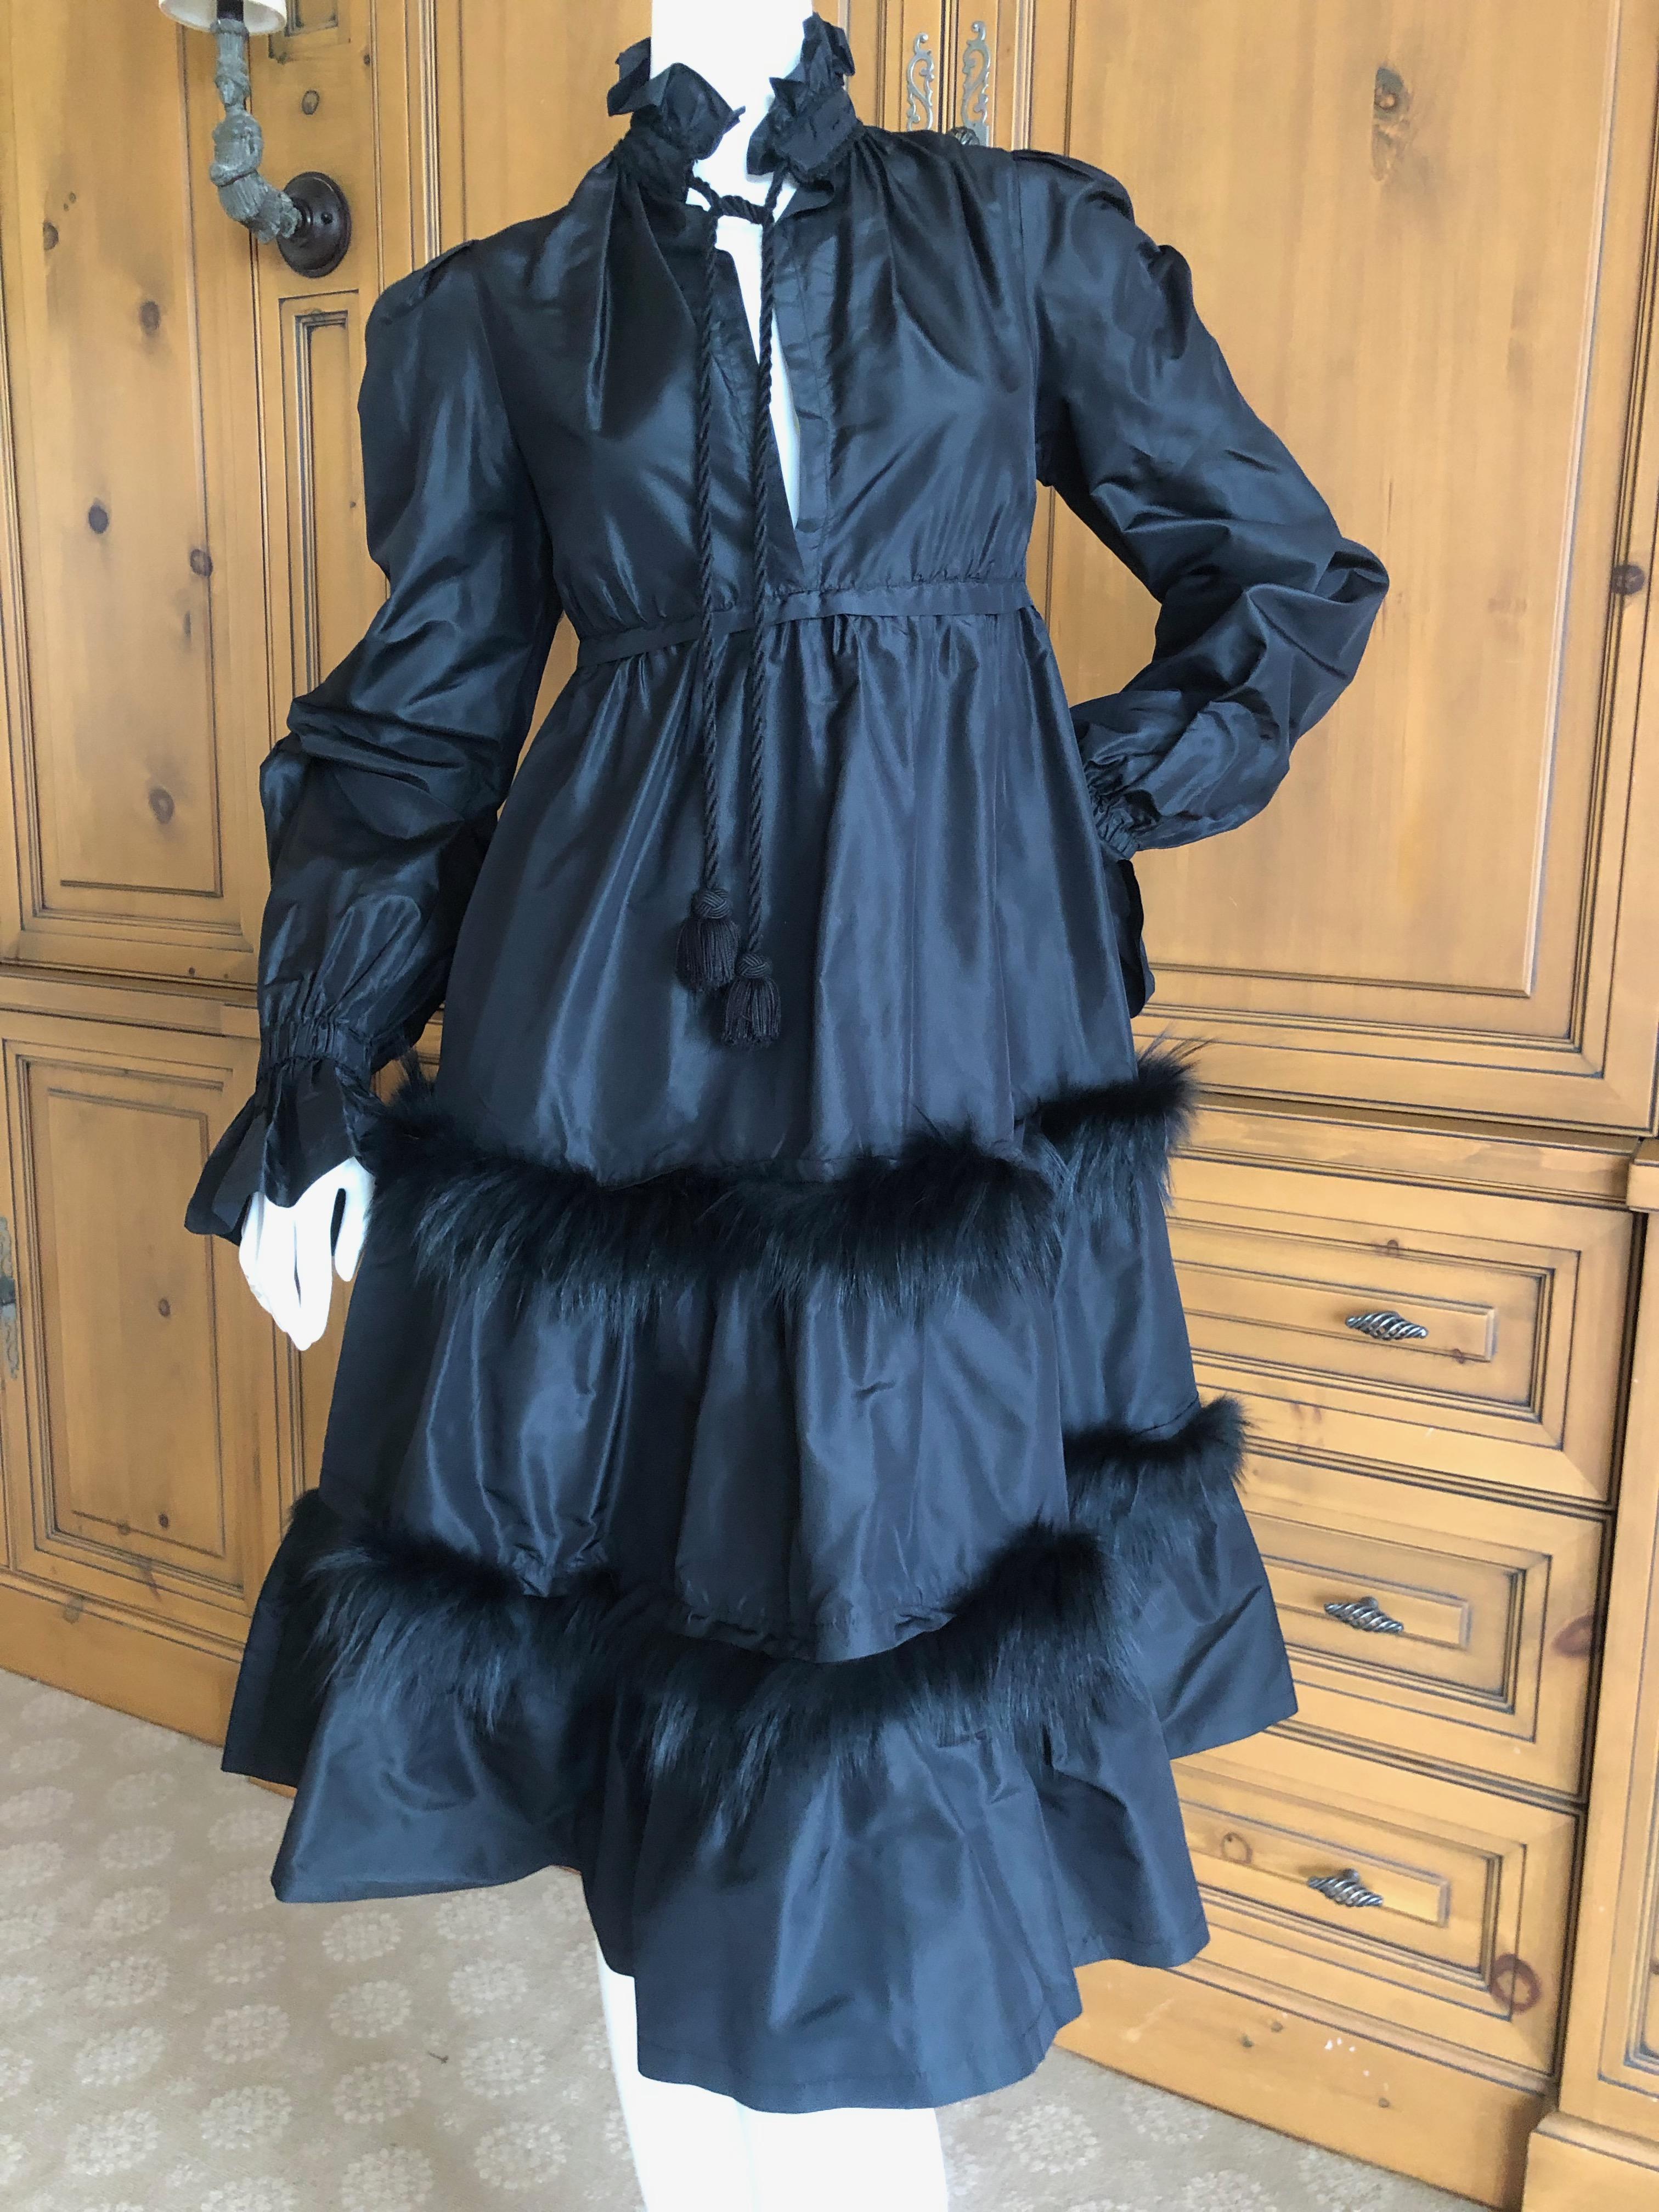 Moschino Vintage Black Silk Taffeta Empire Ball Dress with Fur Trim Sz 8 In Excellent Condition For Sale In Cloverdale, CA